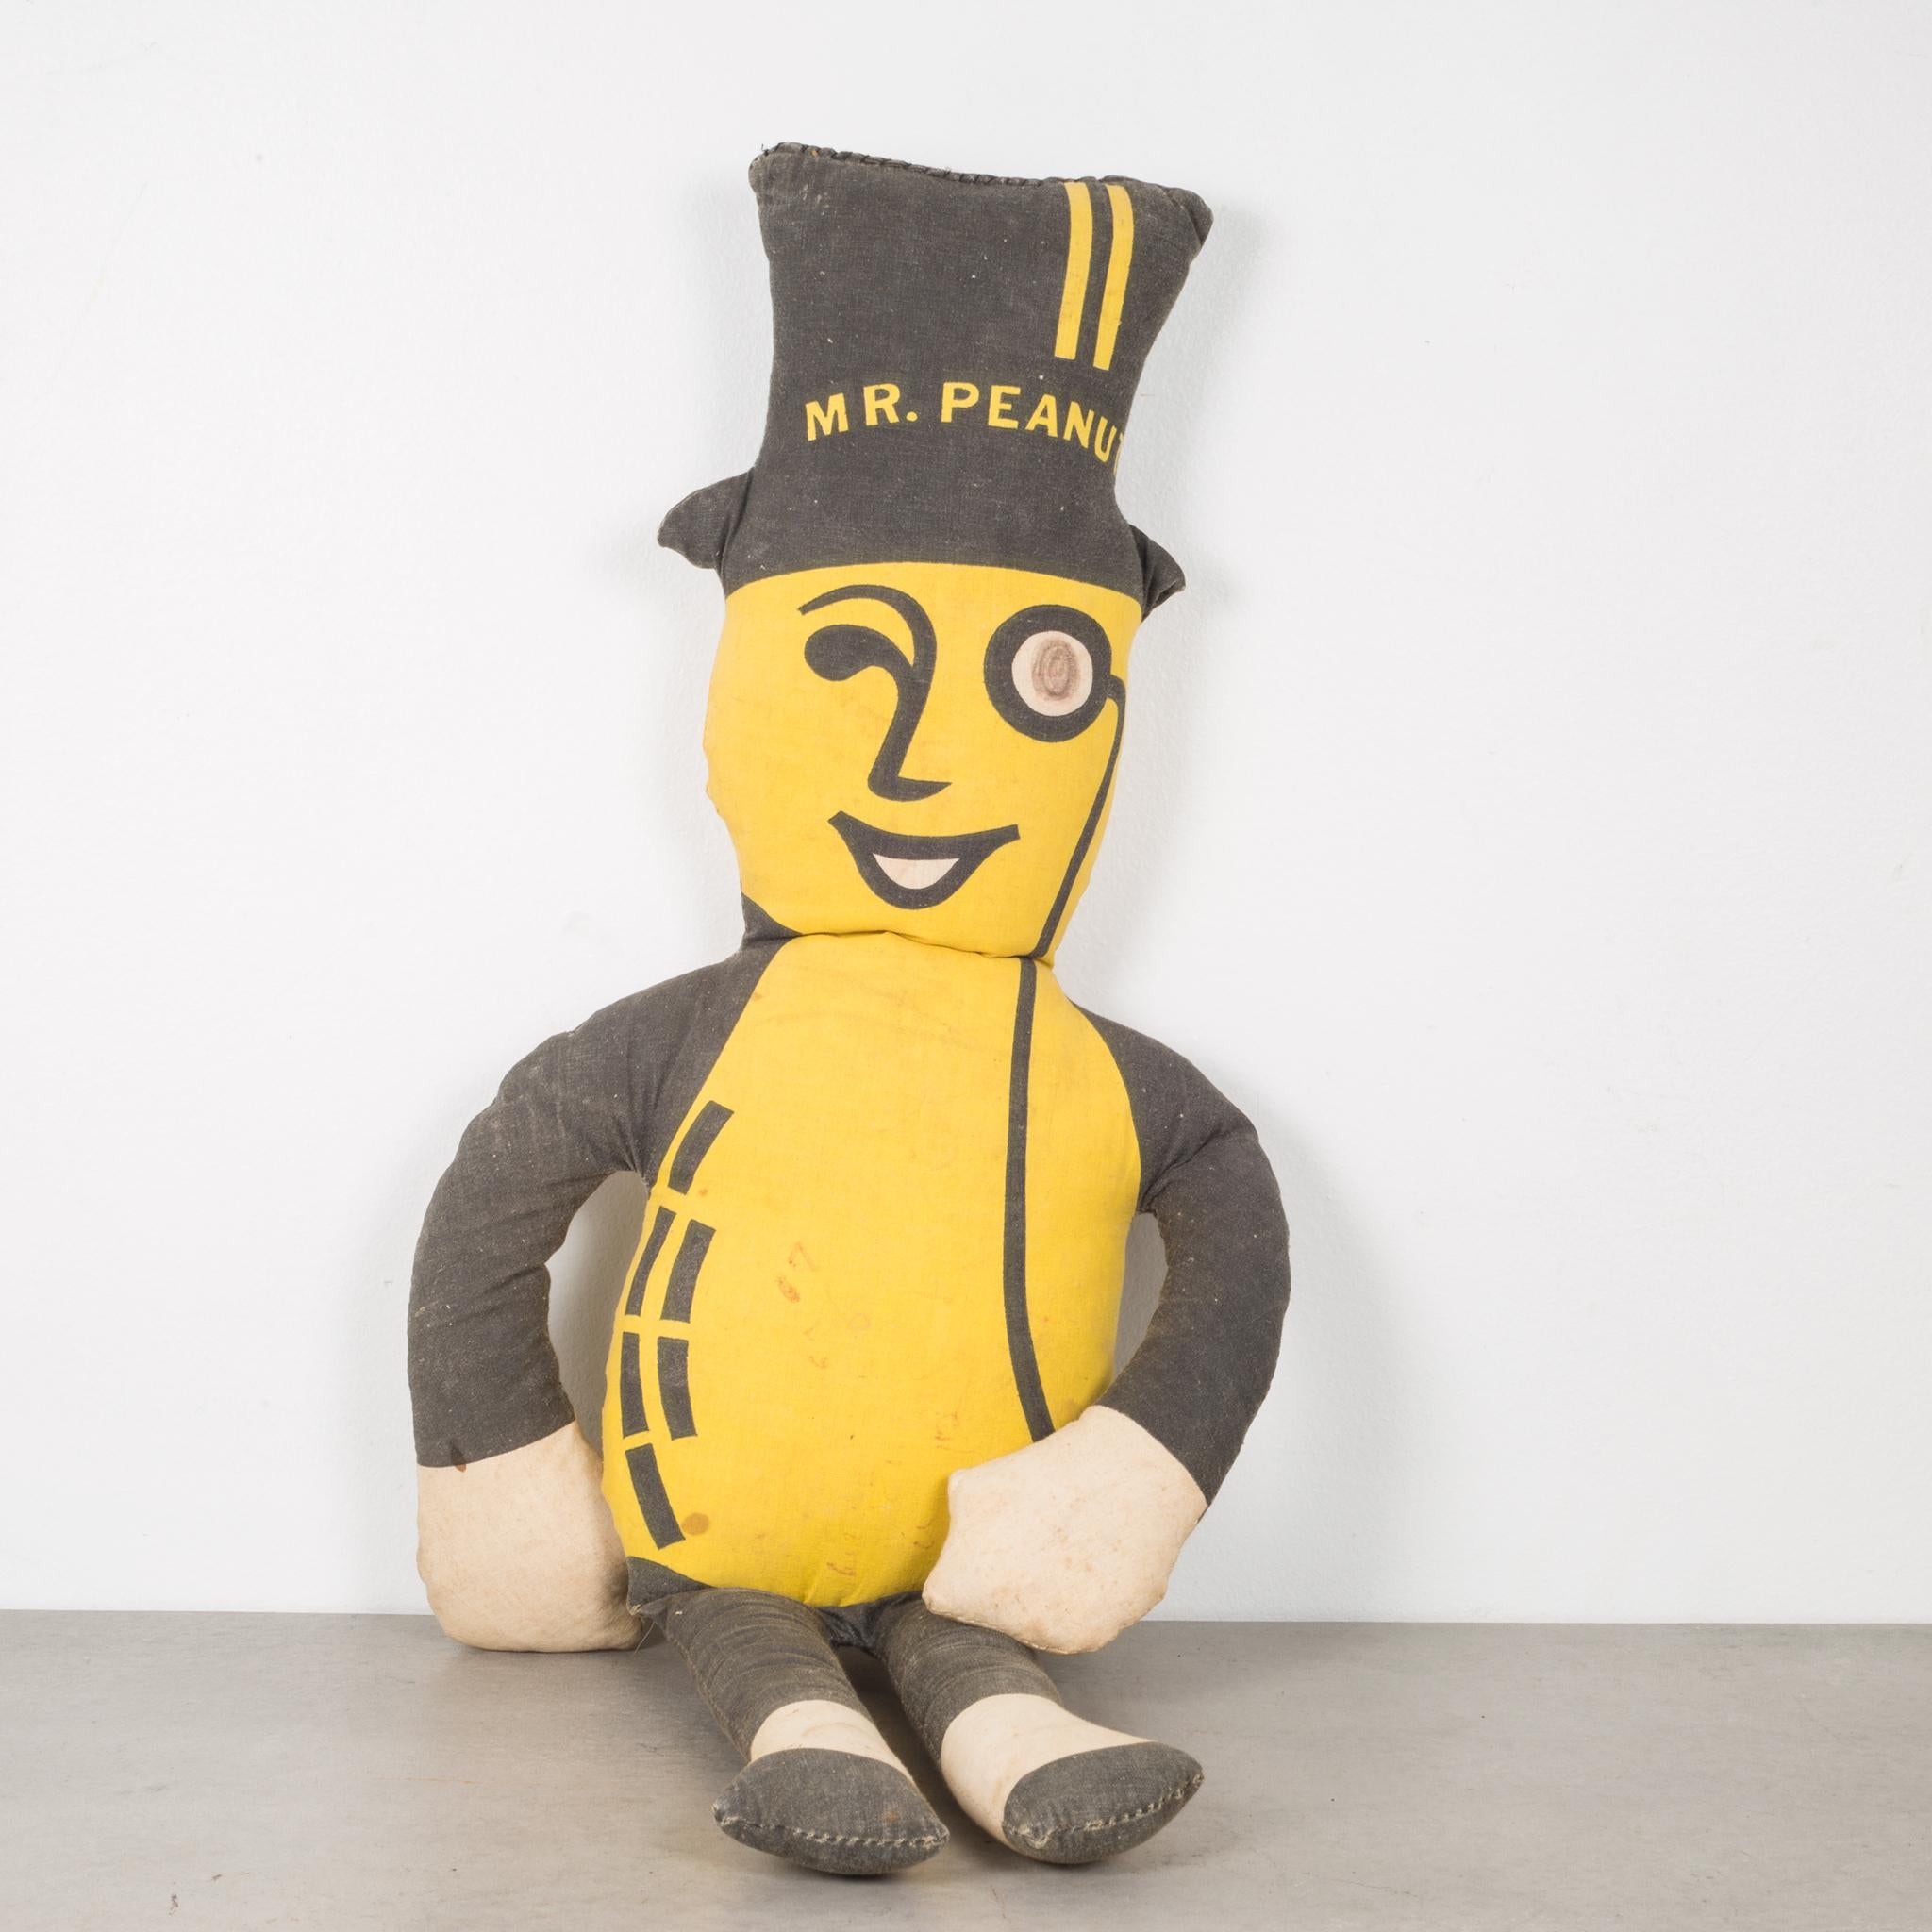 About

A two sided Mr. Peanut plush toy.

Creator: Planters peanuts.
Date of manufacture: circa 1950-1960.
Materials and techniques: Fabric.
Condition: Good. Wear consistent with age and use.
Dimensions: H 21 in. W 9 in. D 2.5